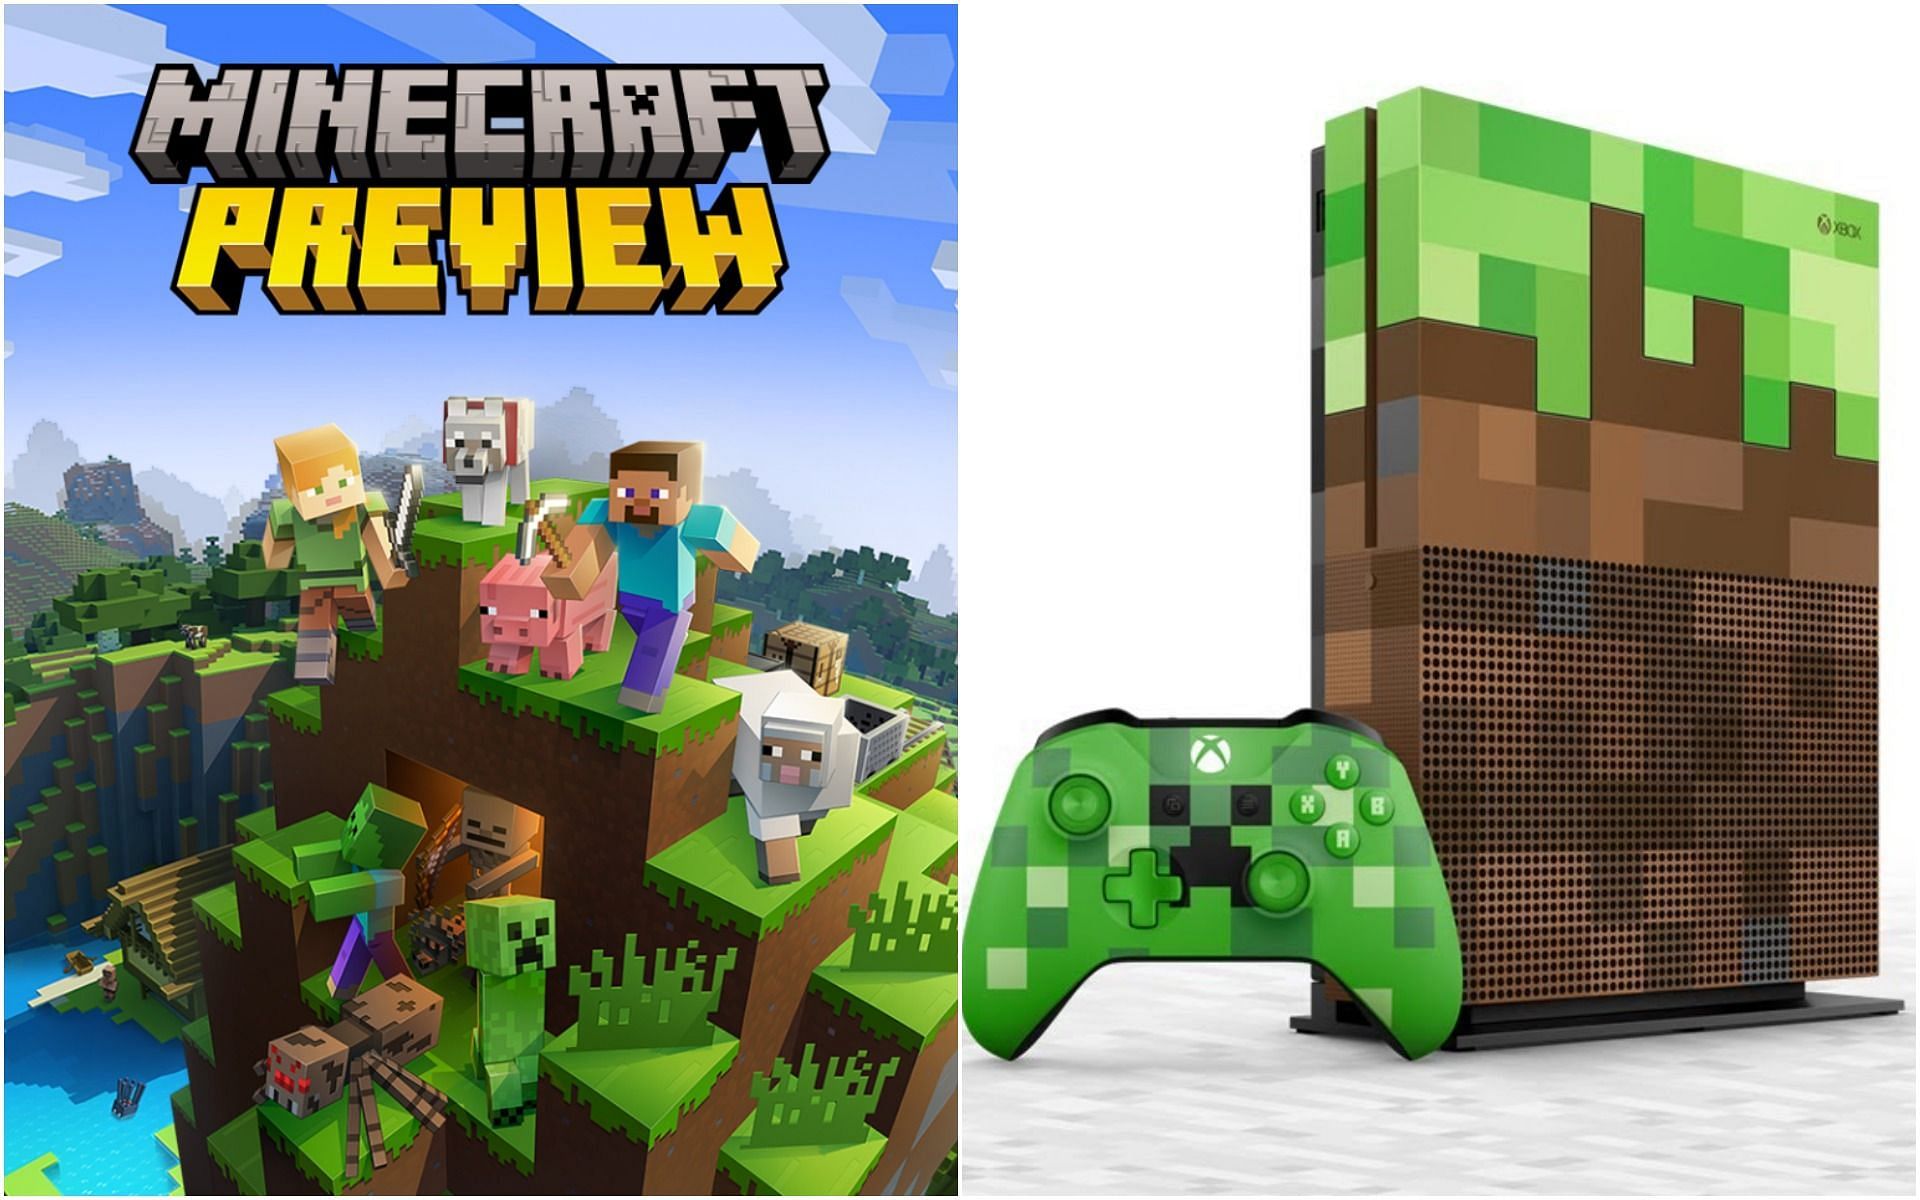 Minecraft Preview is coming to Xbox (Images via Mojang)